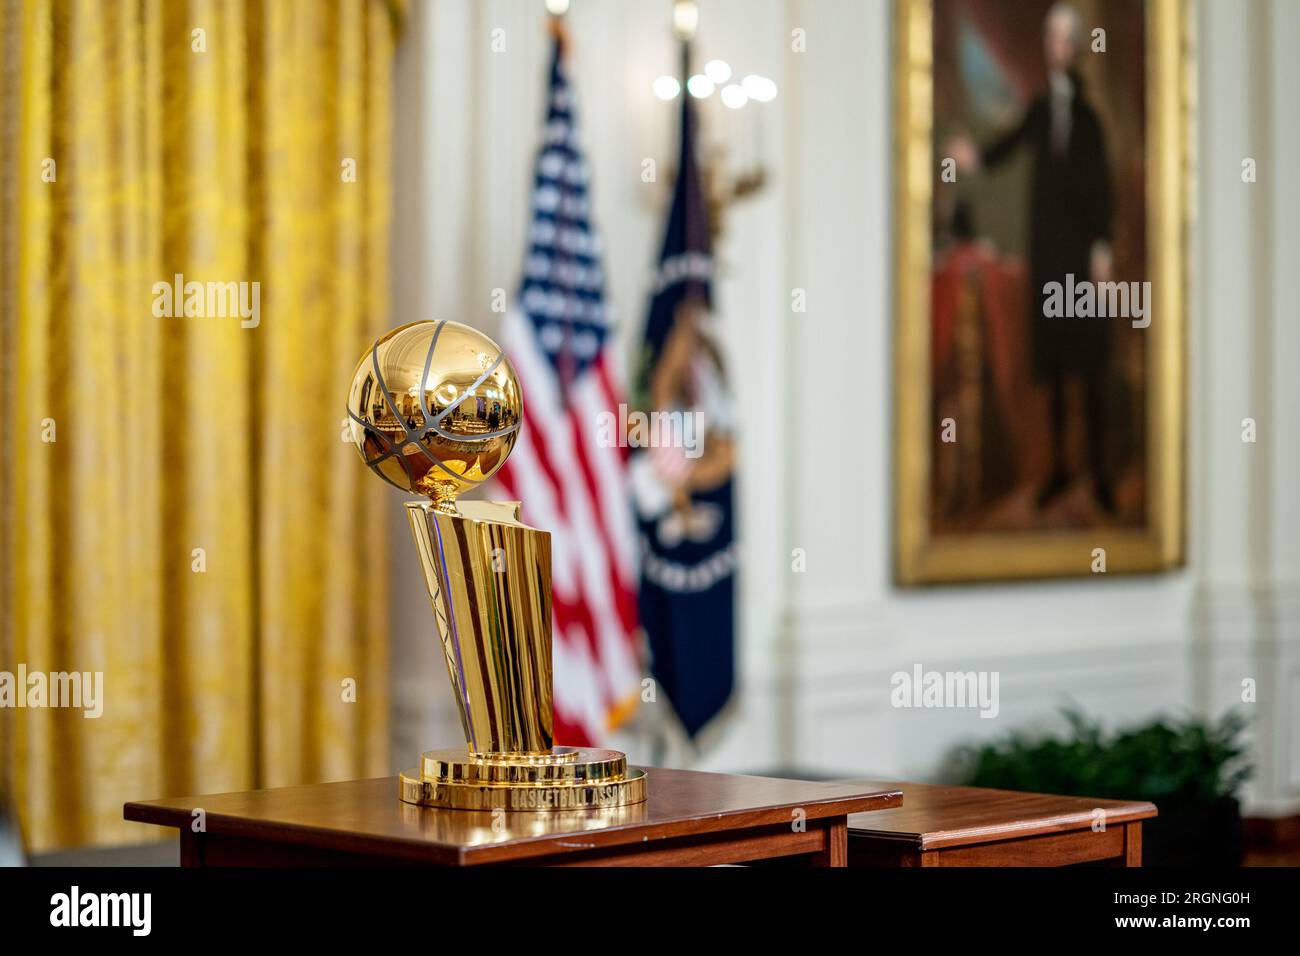 Larry O'Brien NBA Championship Trophy exhibited in China